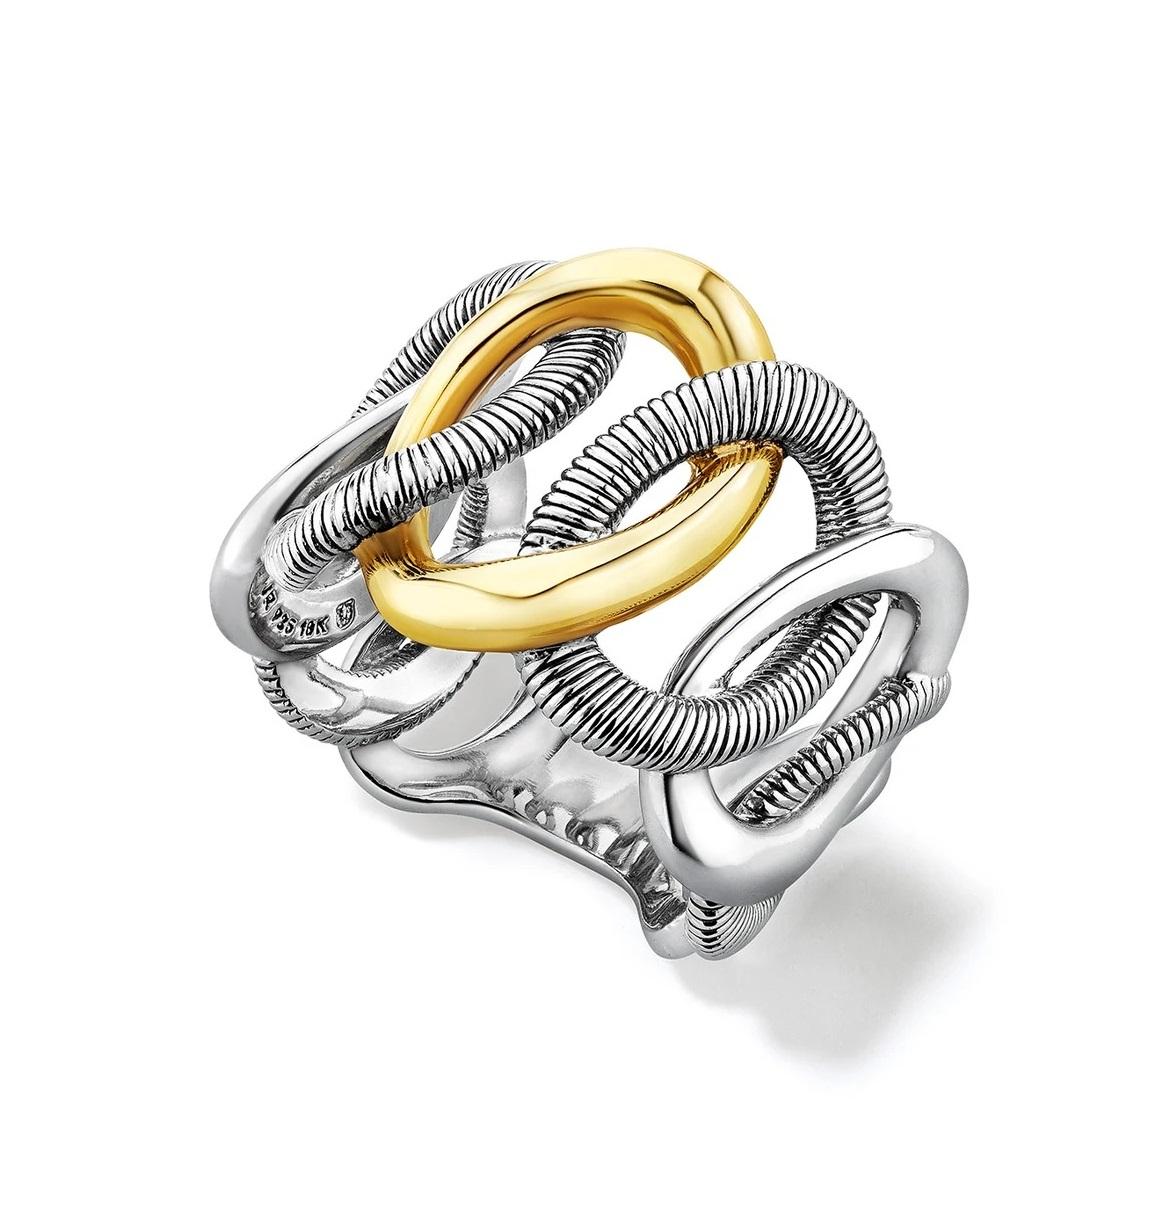 Our Eternity Interlocking Link Band Ring explores a variety of the textures, woven together in a shape that represents the bond of love that is both infinite and everlasting.

Sterling Silver with 18K Gold
Width: ¾